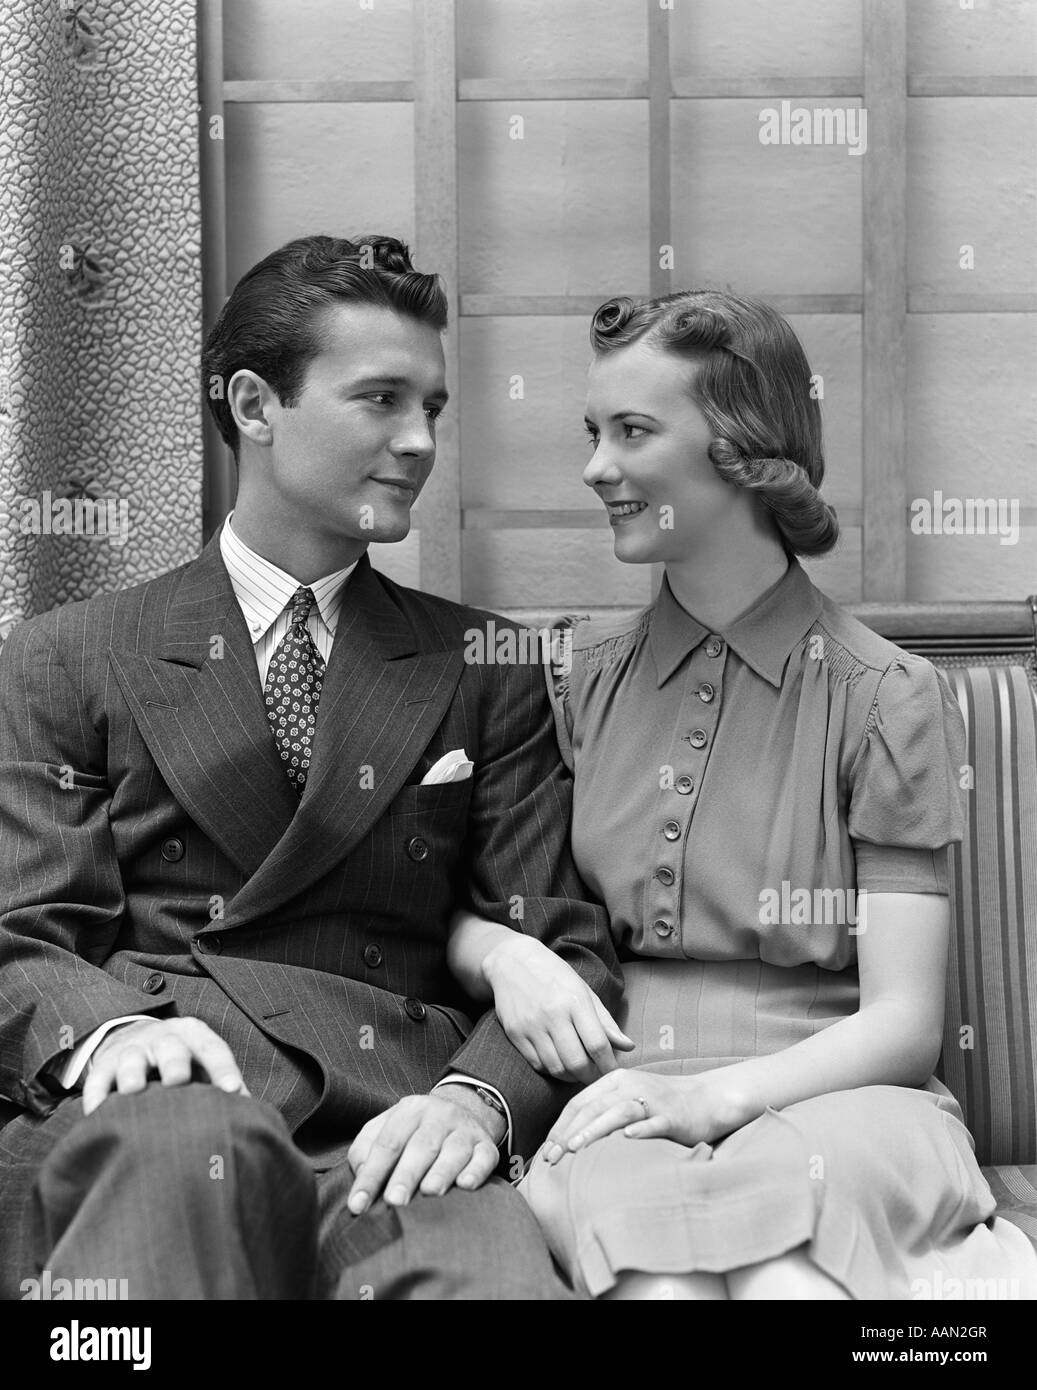 1930s 1940s COUPLE SITTING IN CHAIR ARMS LOCKED LOOKING AT ONE ANOTHER Stock Photo